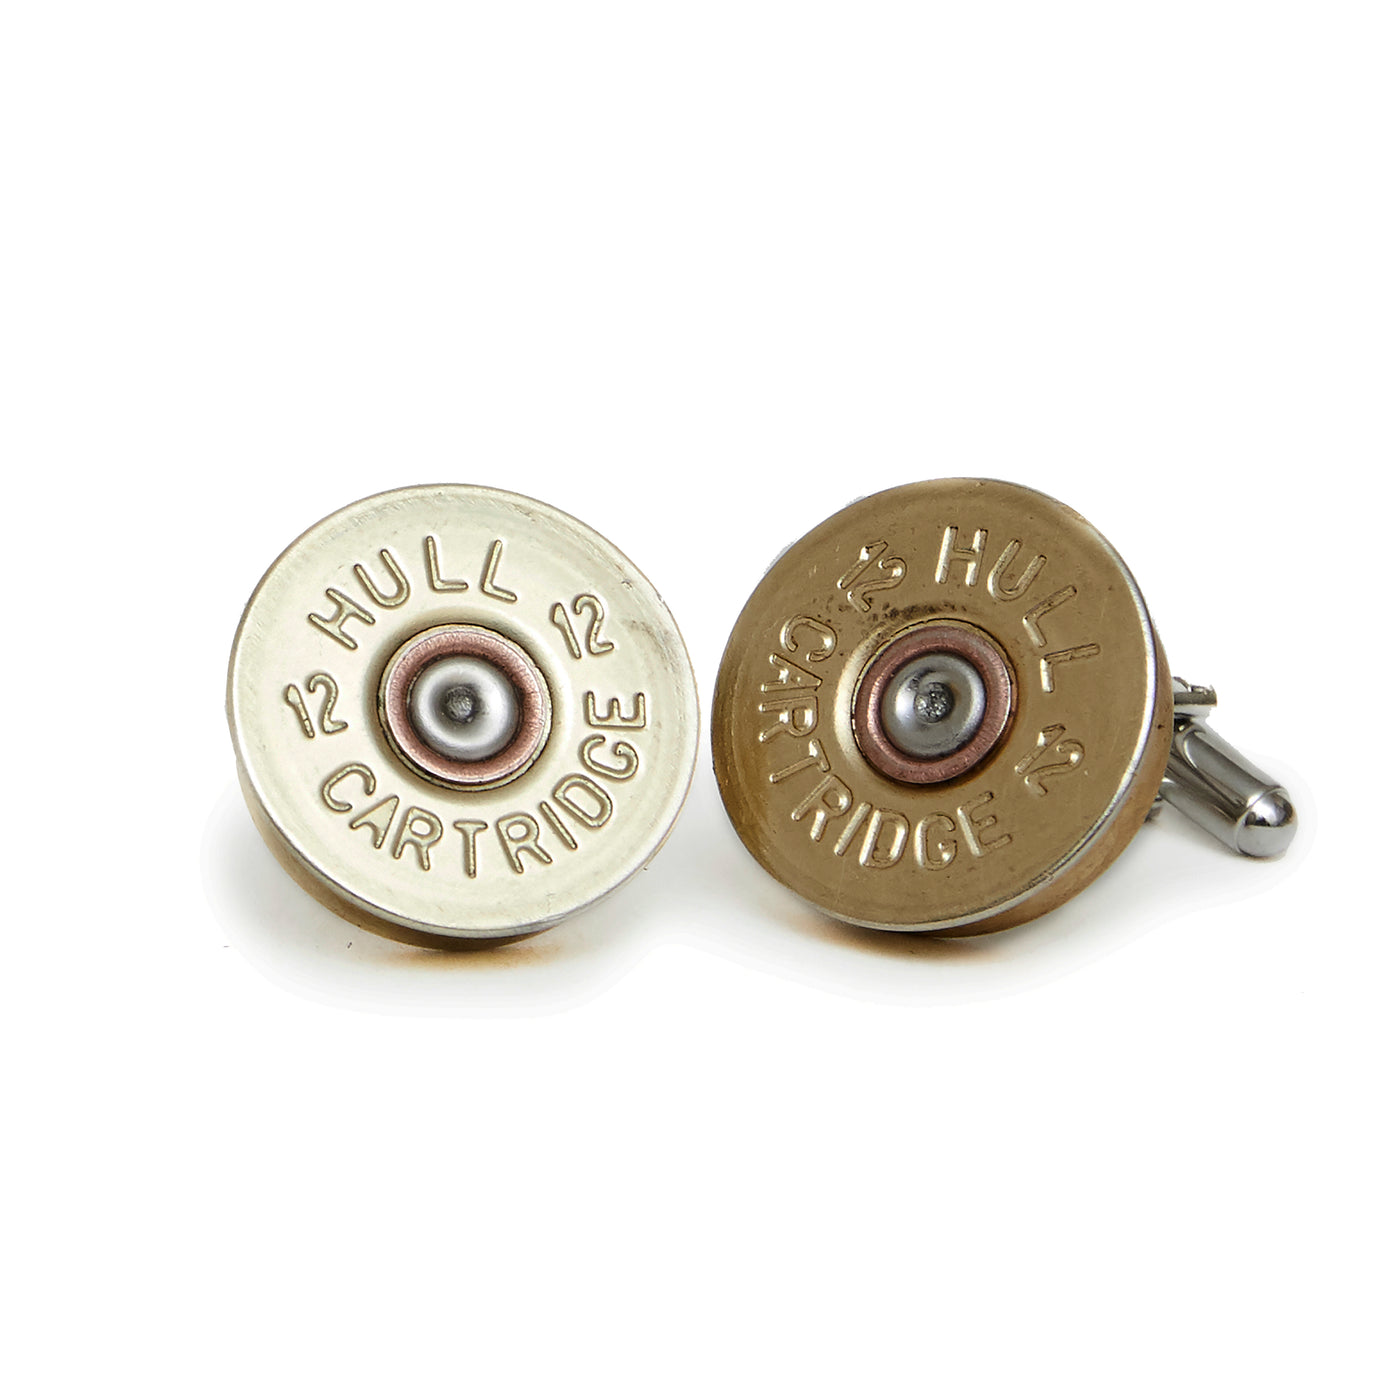 12bore Cufflinks-Cufflinks-Hicks and Hides-Plain Brass-Hicks and Hides- country shooting fashion leather goods